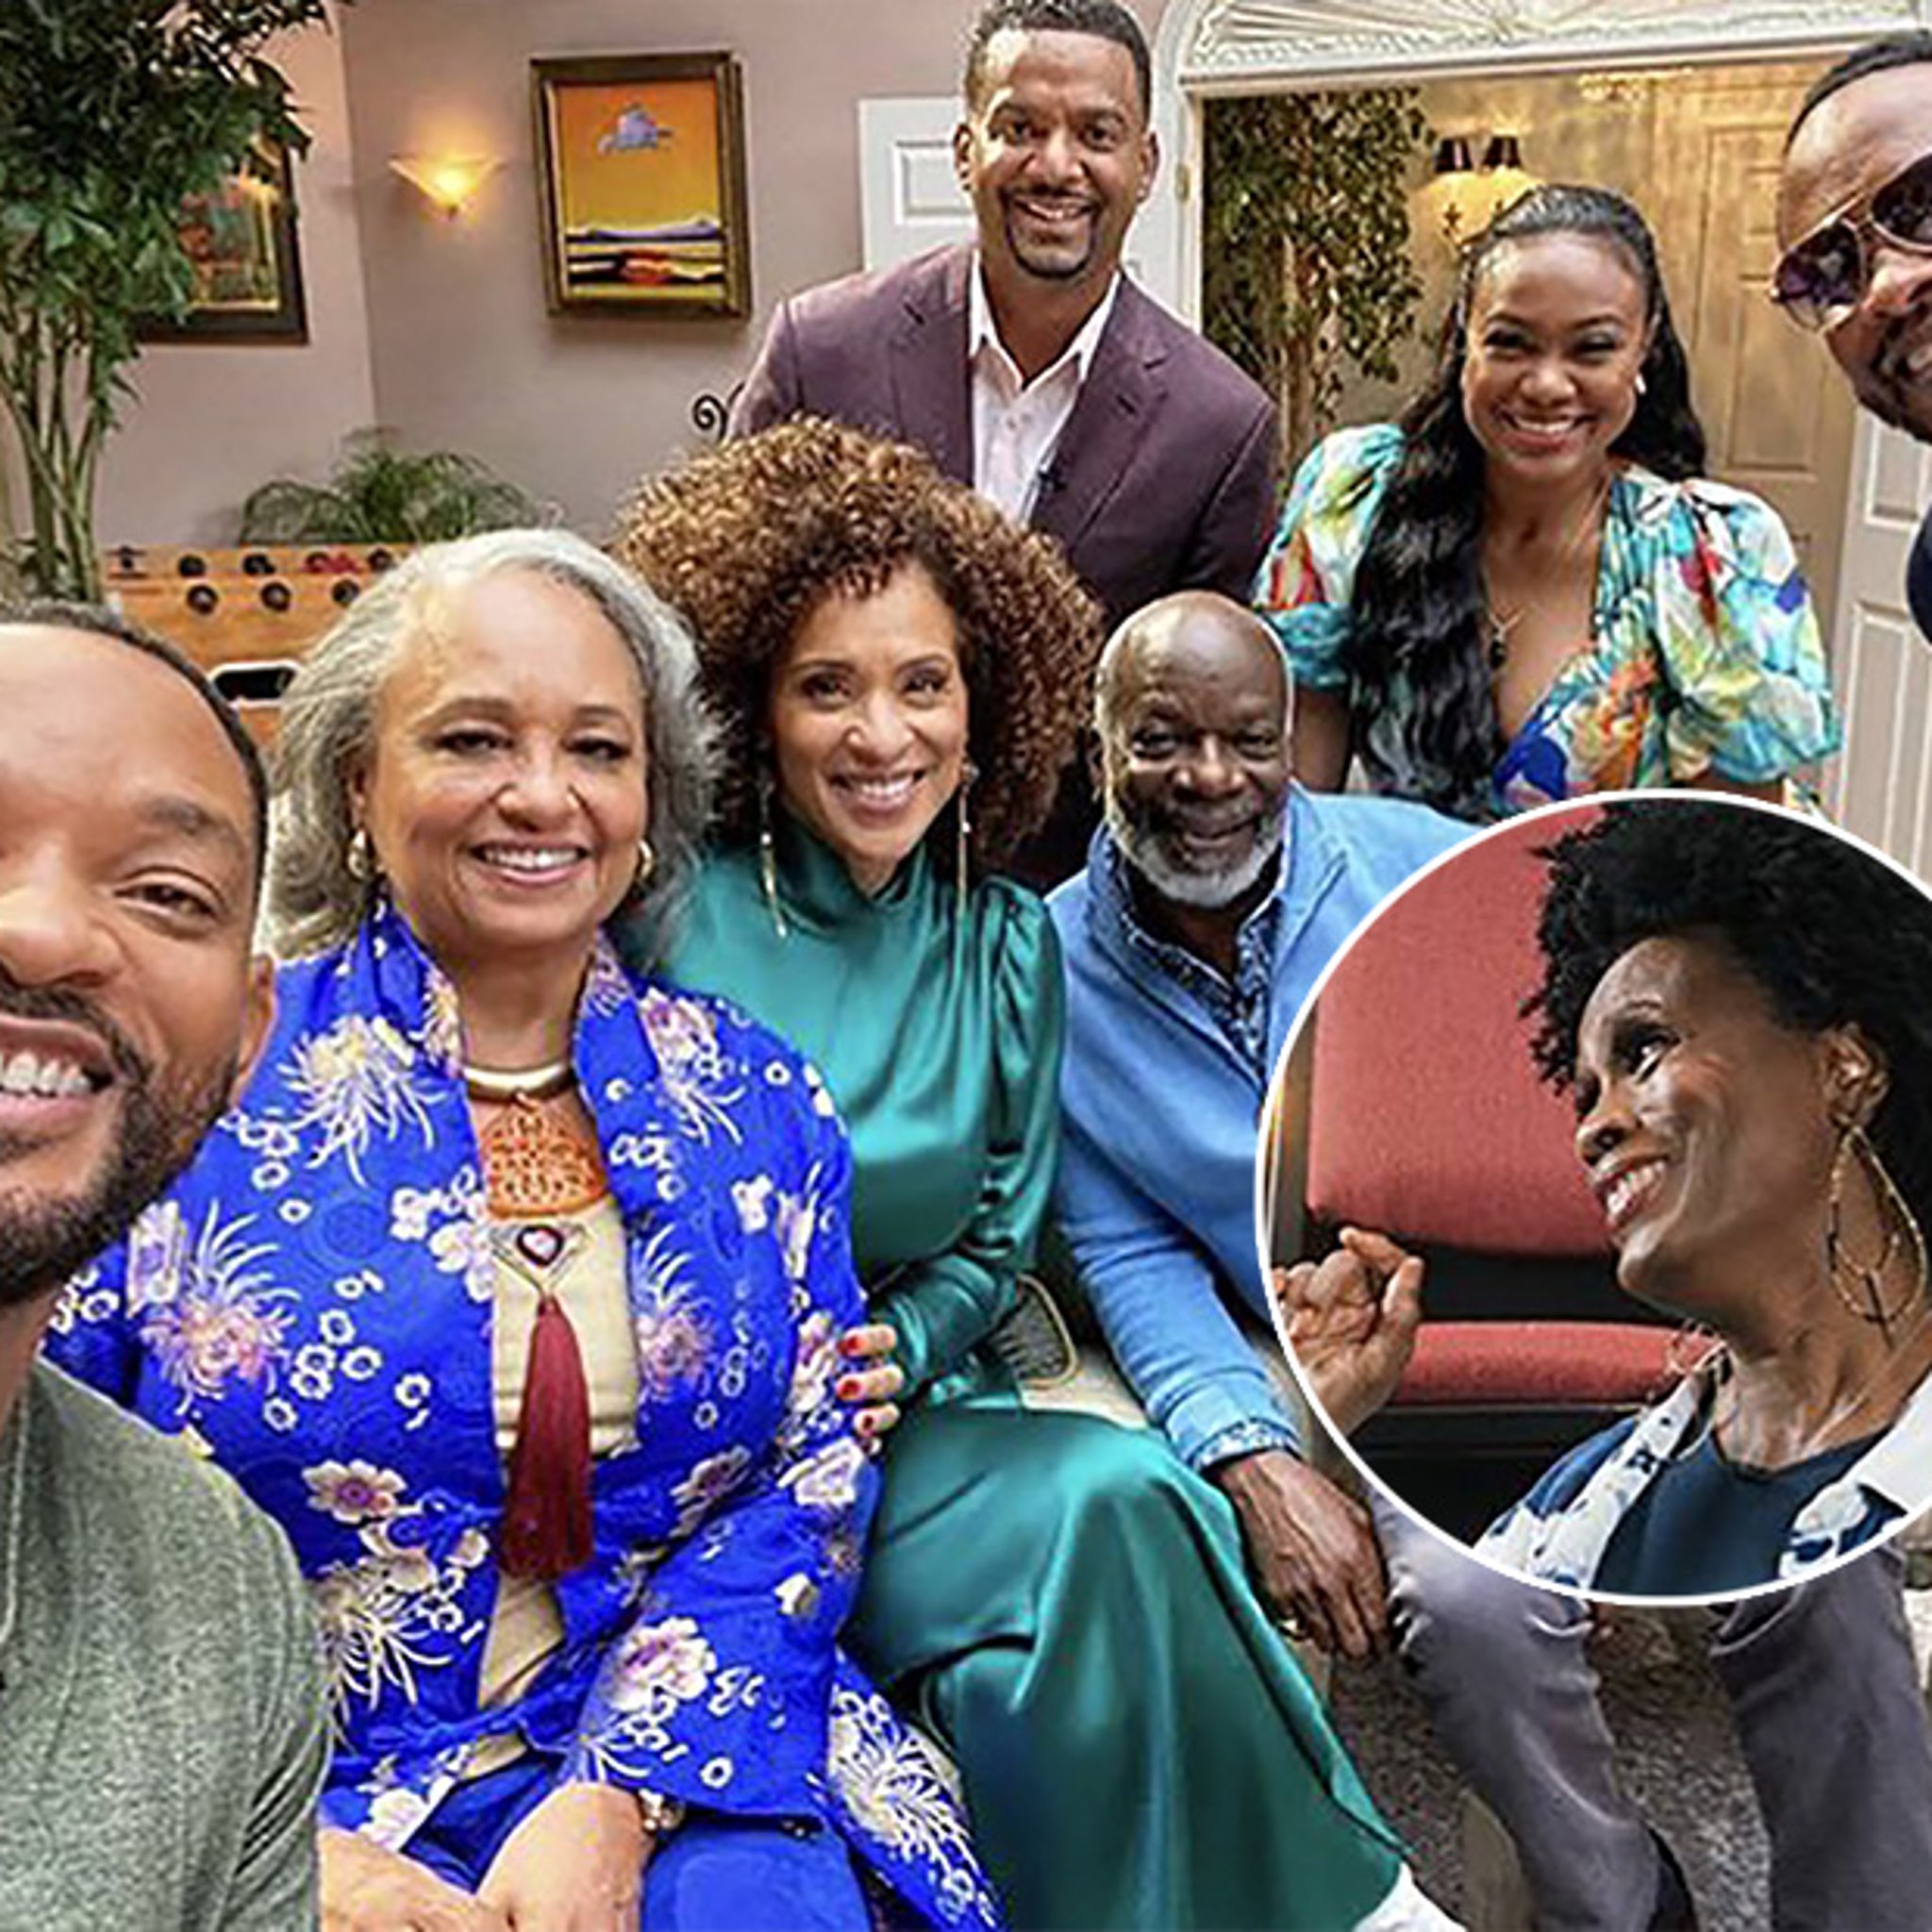 Fresh Prince of Bel-Air Reunion! Will Smith Reunites with Alfonso